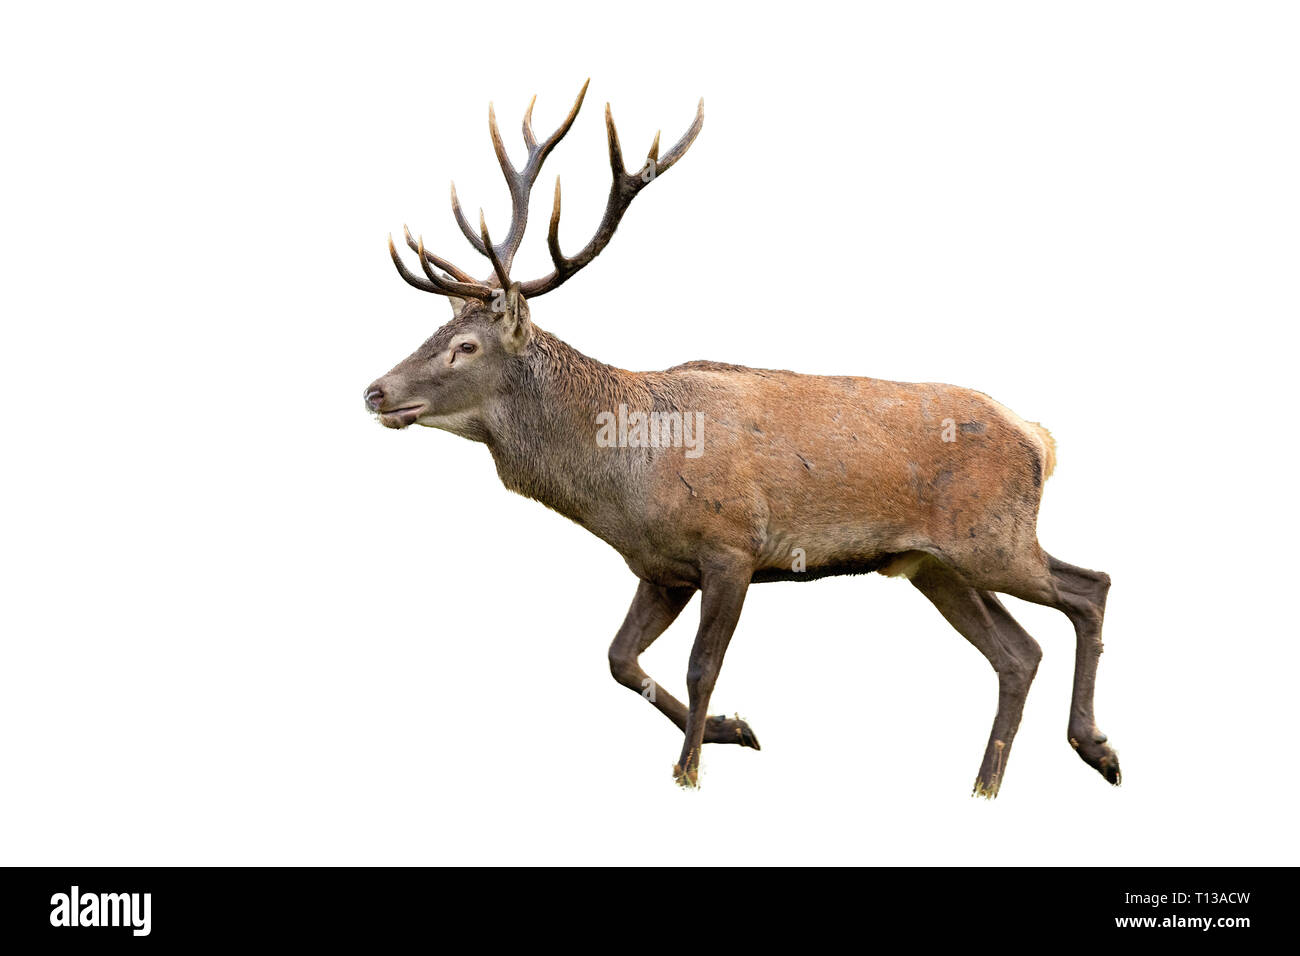 Isolated walking red deer stag with antlers Stock Photo